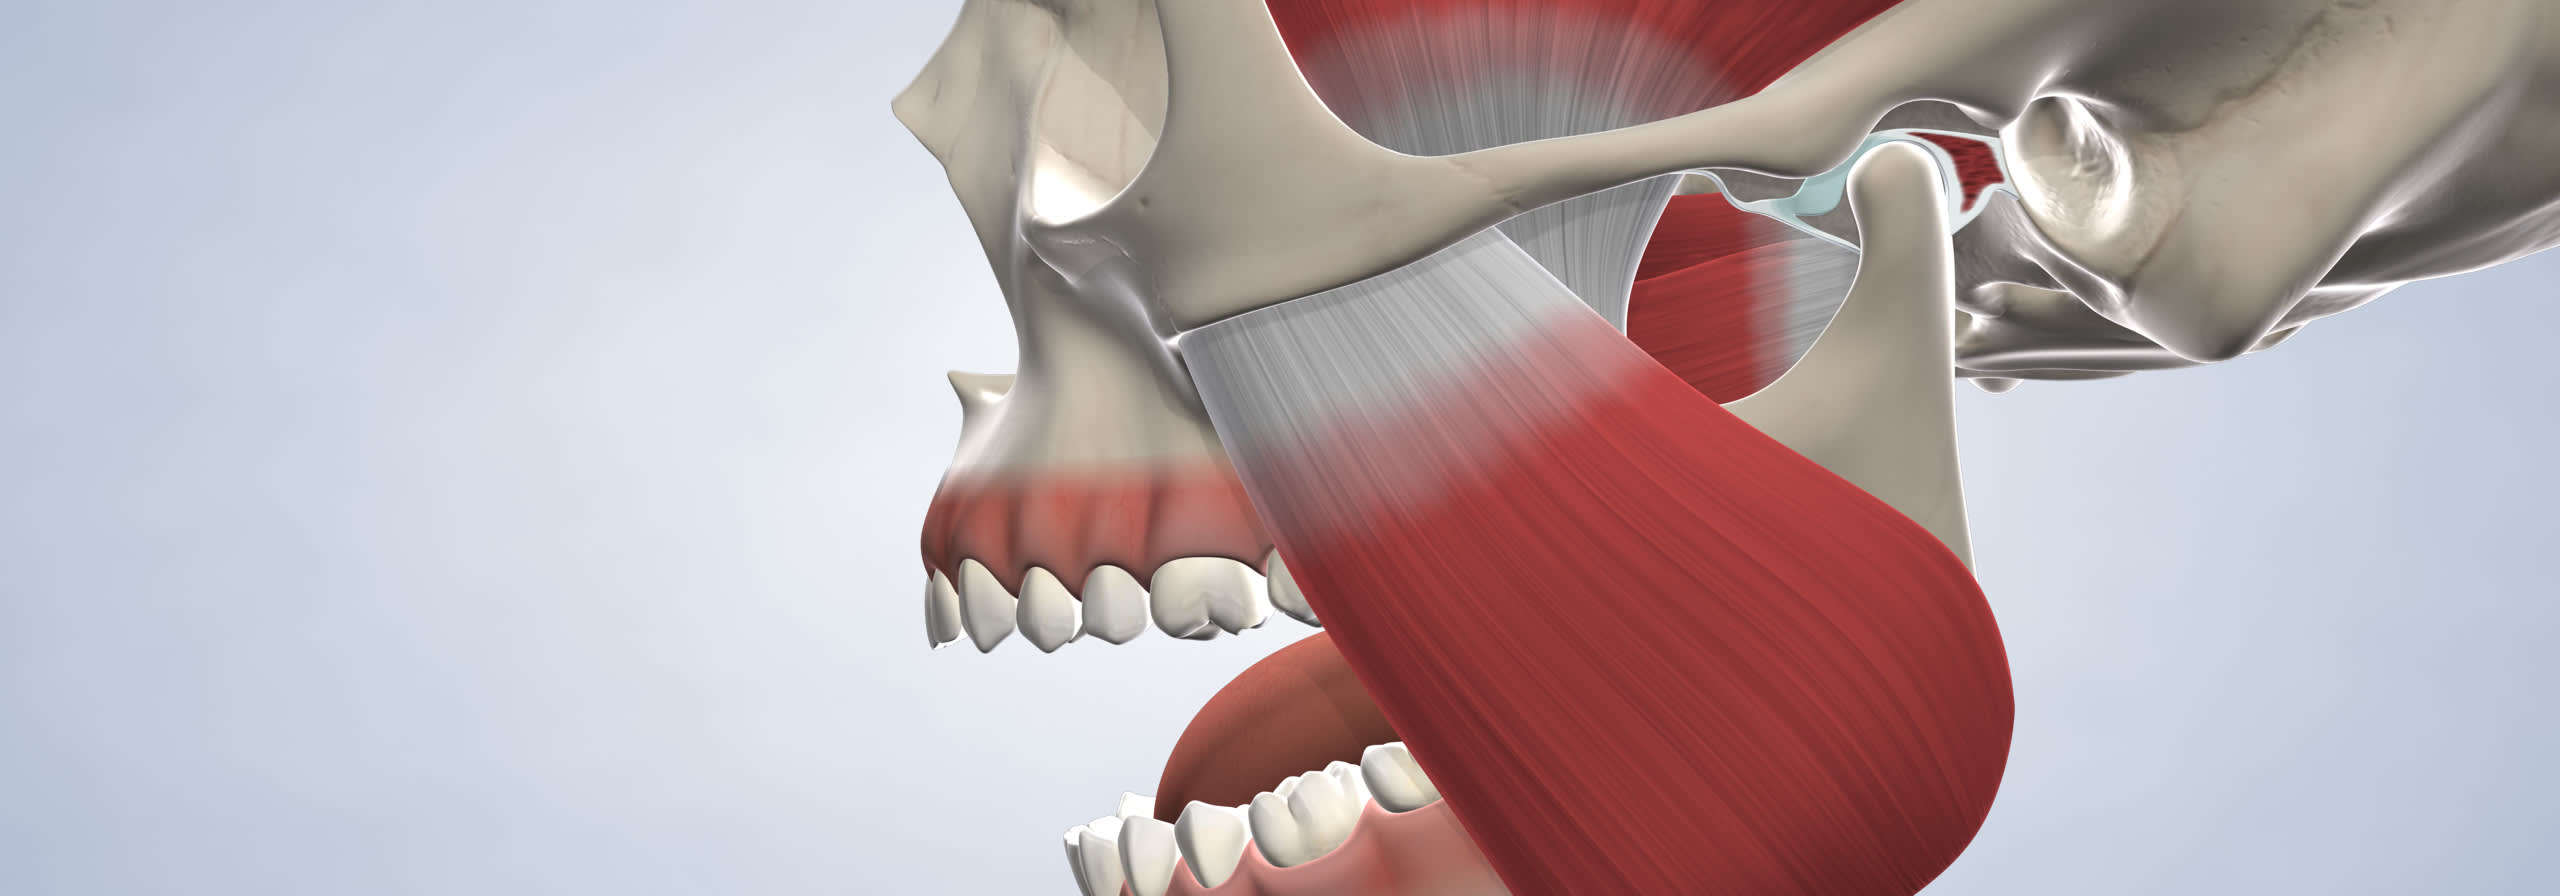 Jaw muscles and teeth.